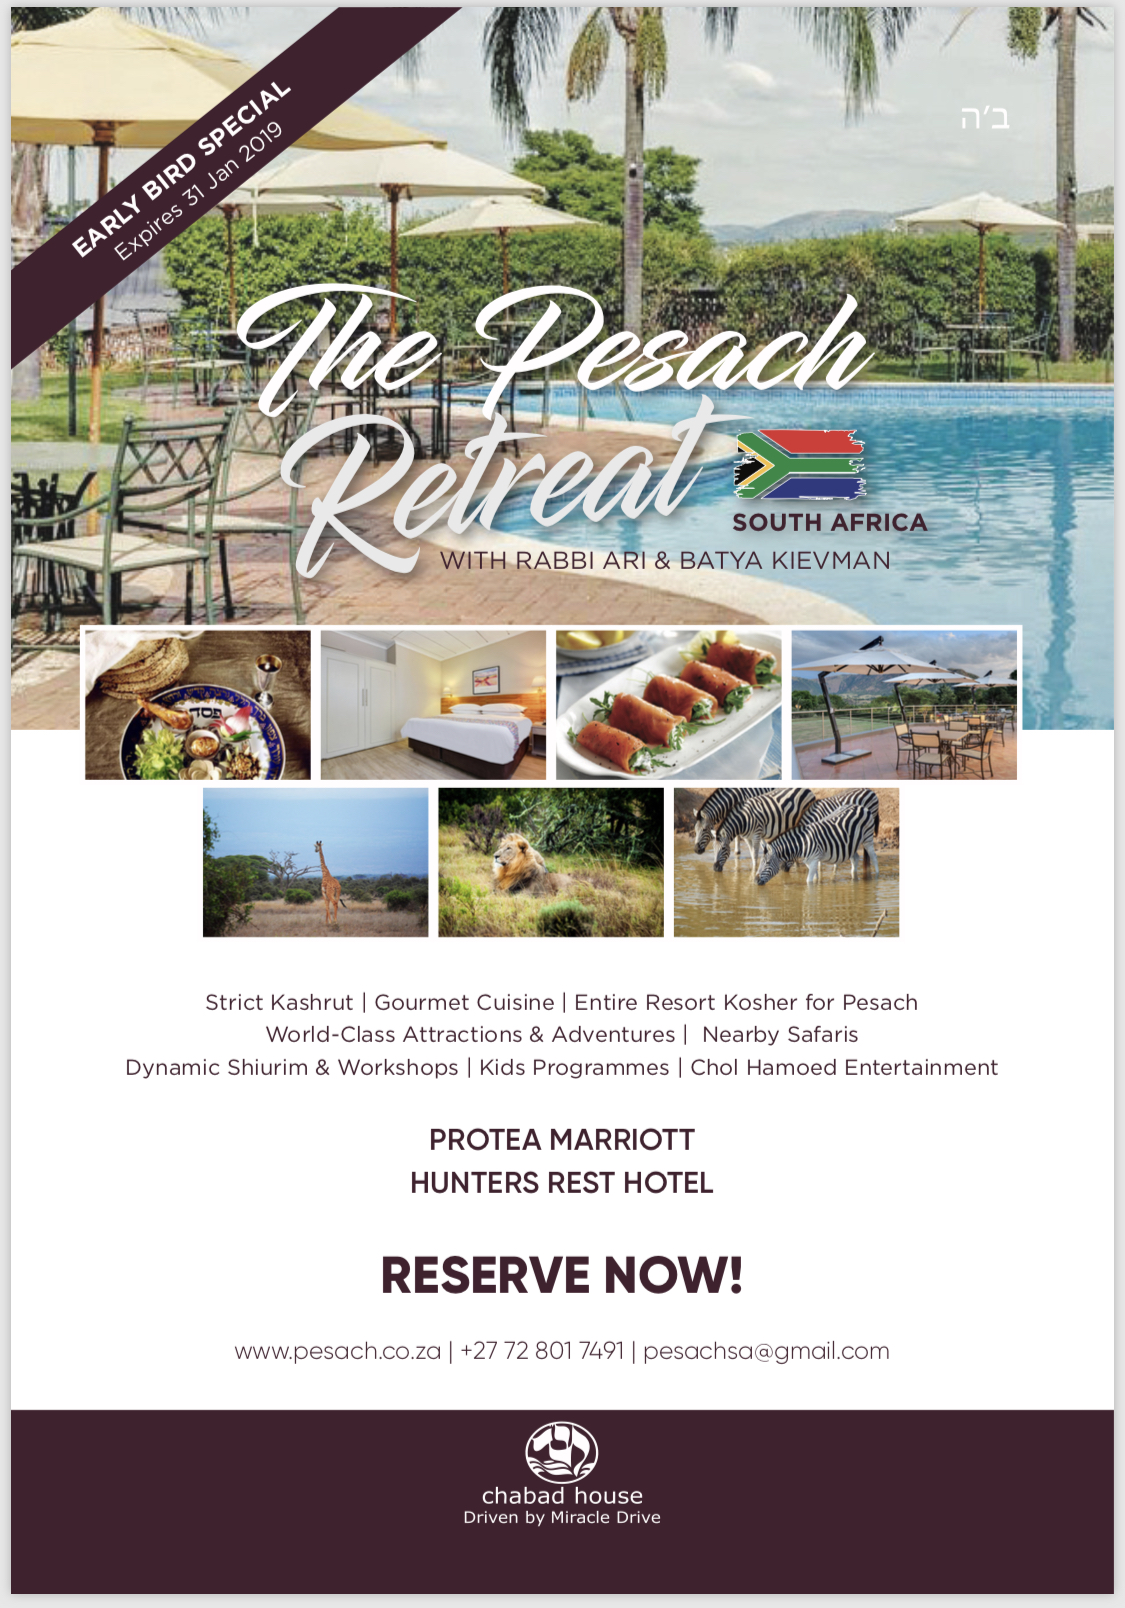 The Pesach Retreat South Africa